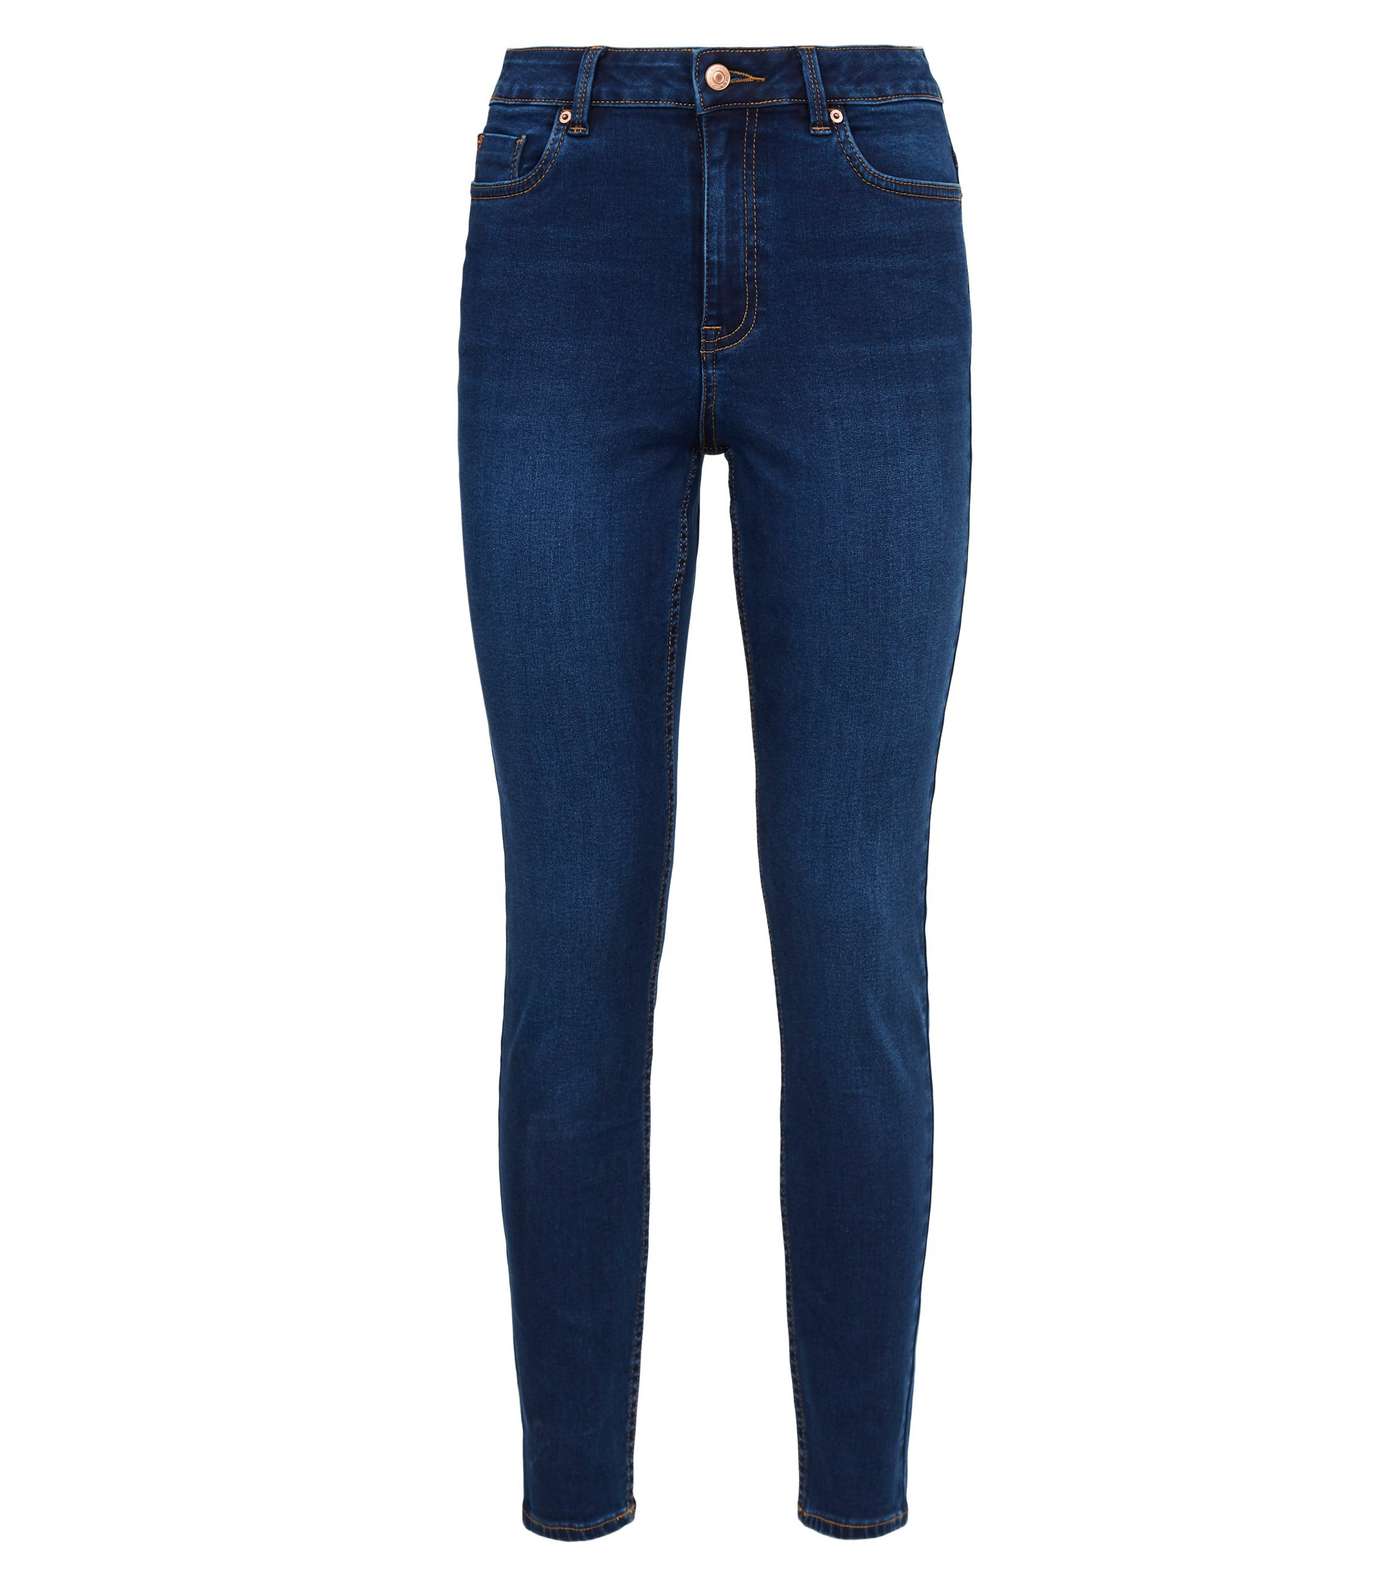 Blue Rinse Wash Mid Rise India Super Skinny Jeans Image 4